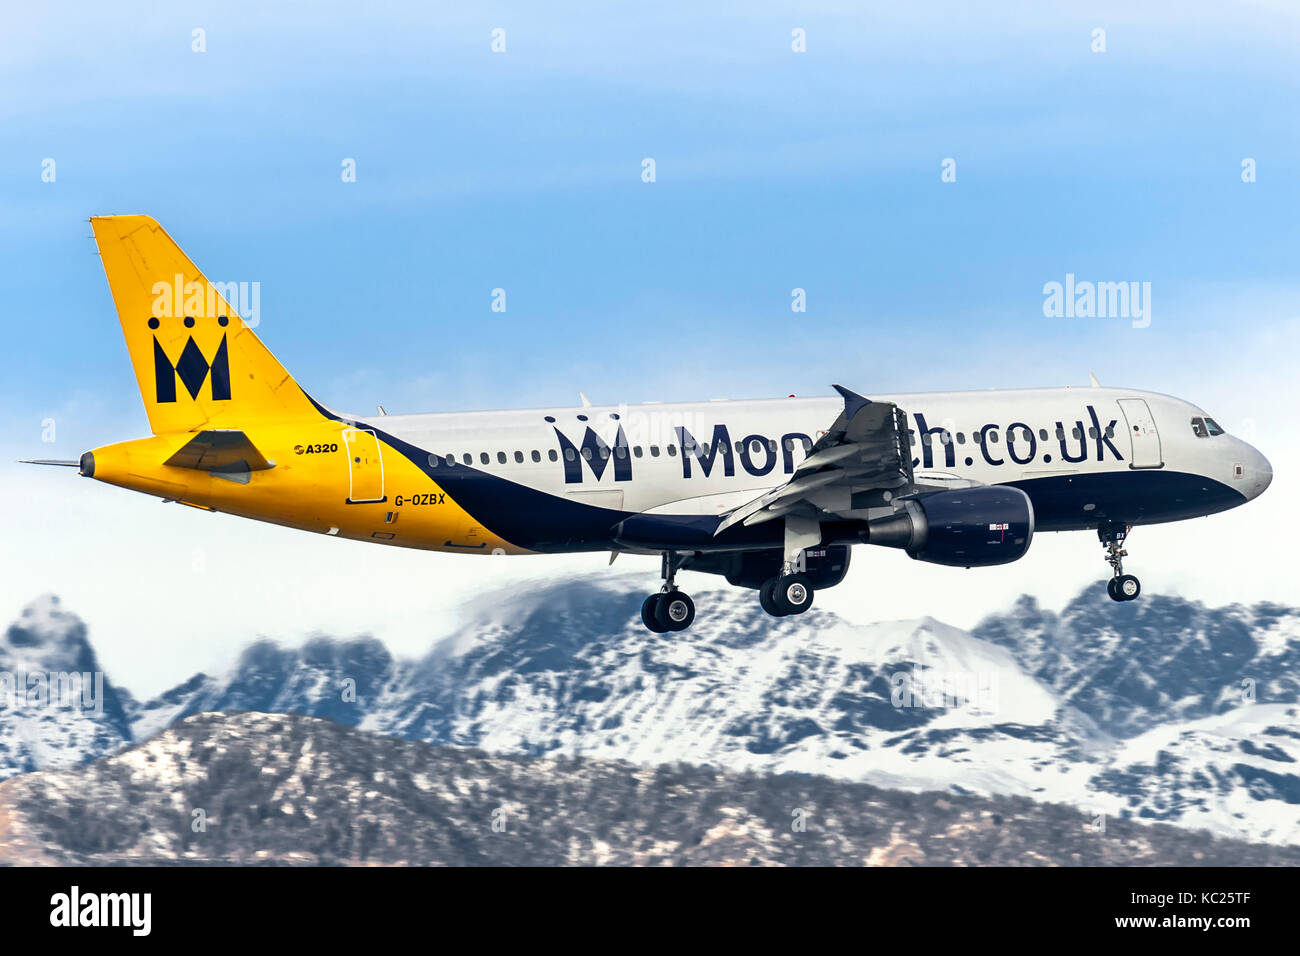 Airbus A320 Monarch Airline. October 2, 017 The british company has failed. Founded on June 5, 1967 by Bill Hodgson based at Luton Airport. A300 B757 Stock Photo